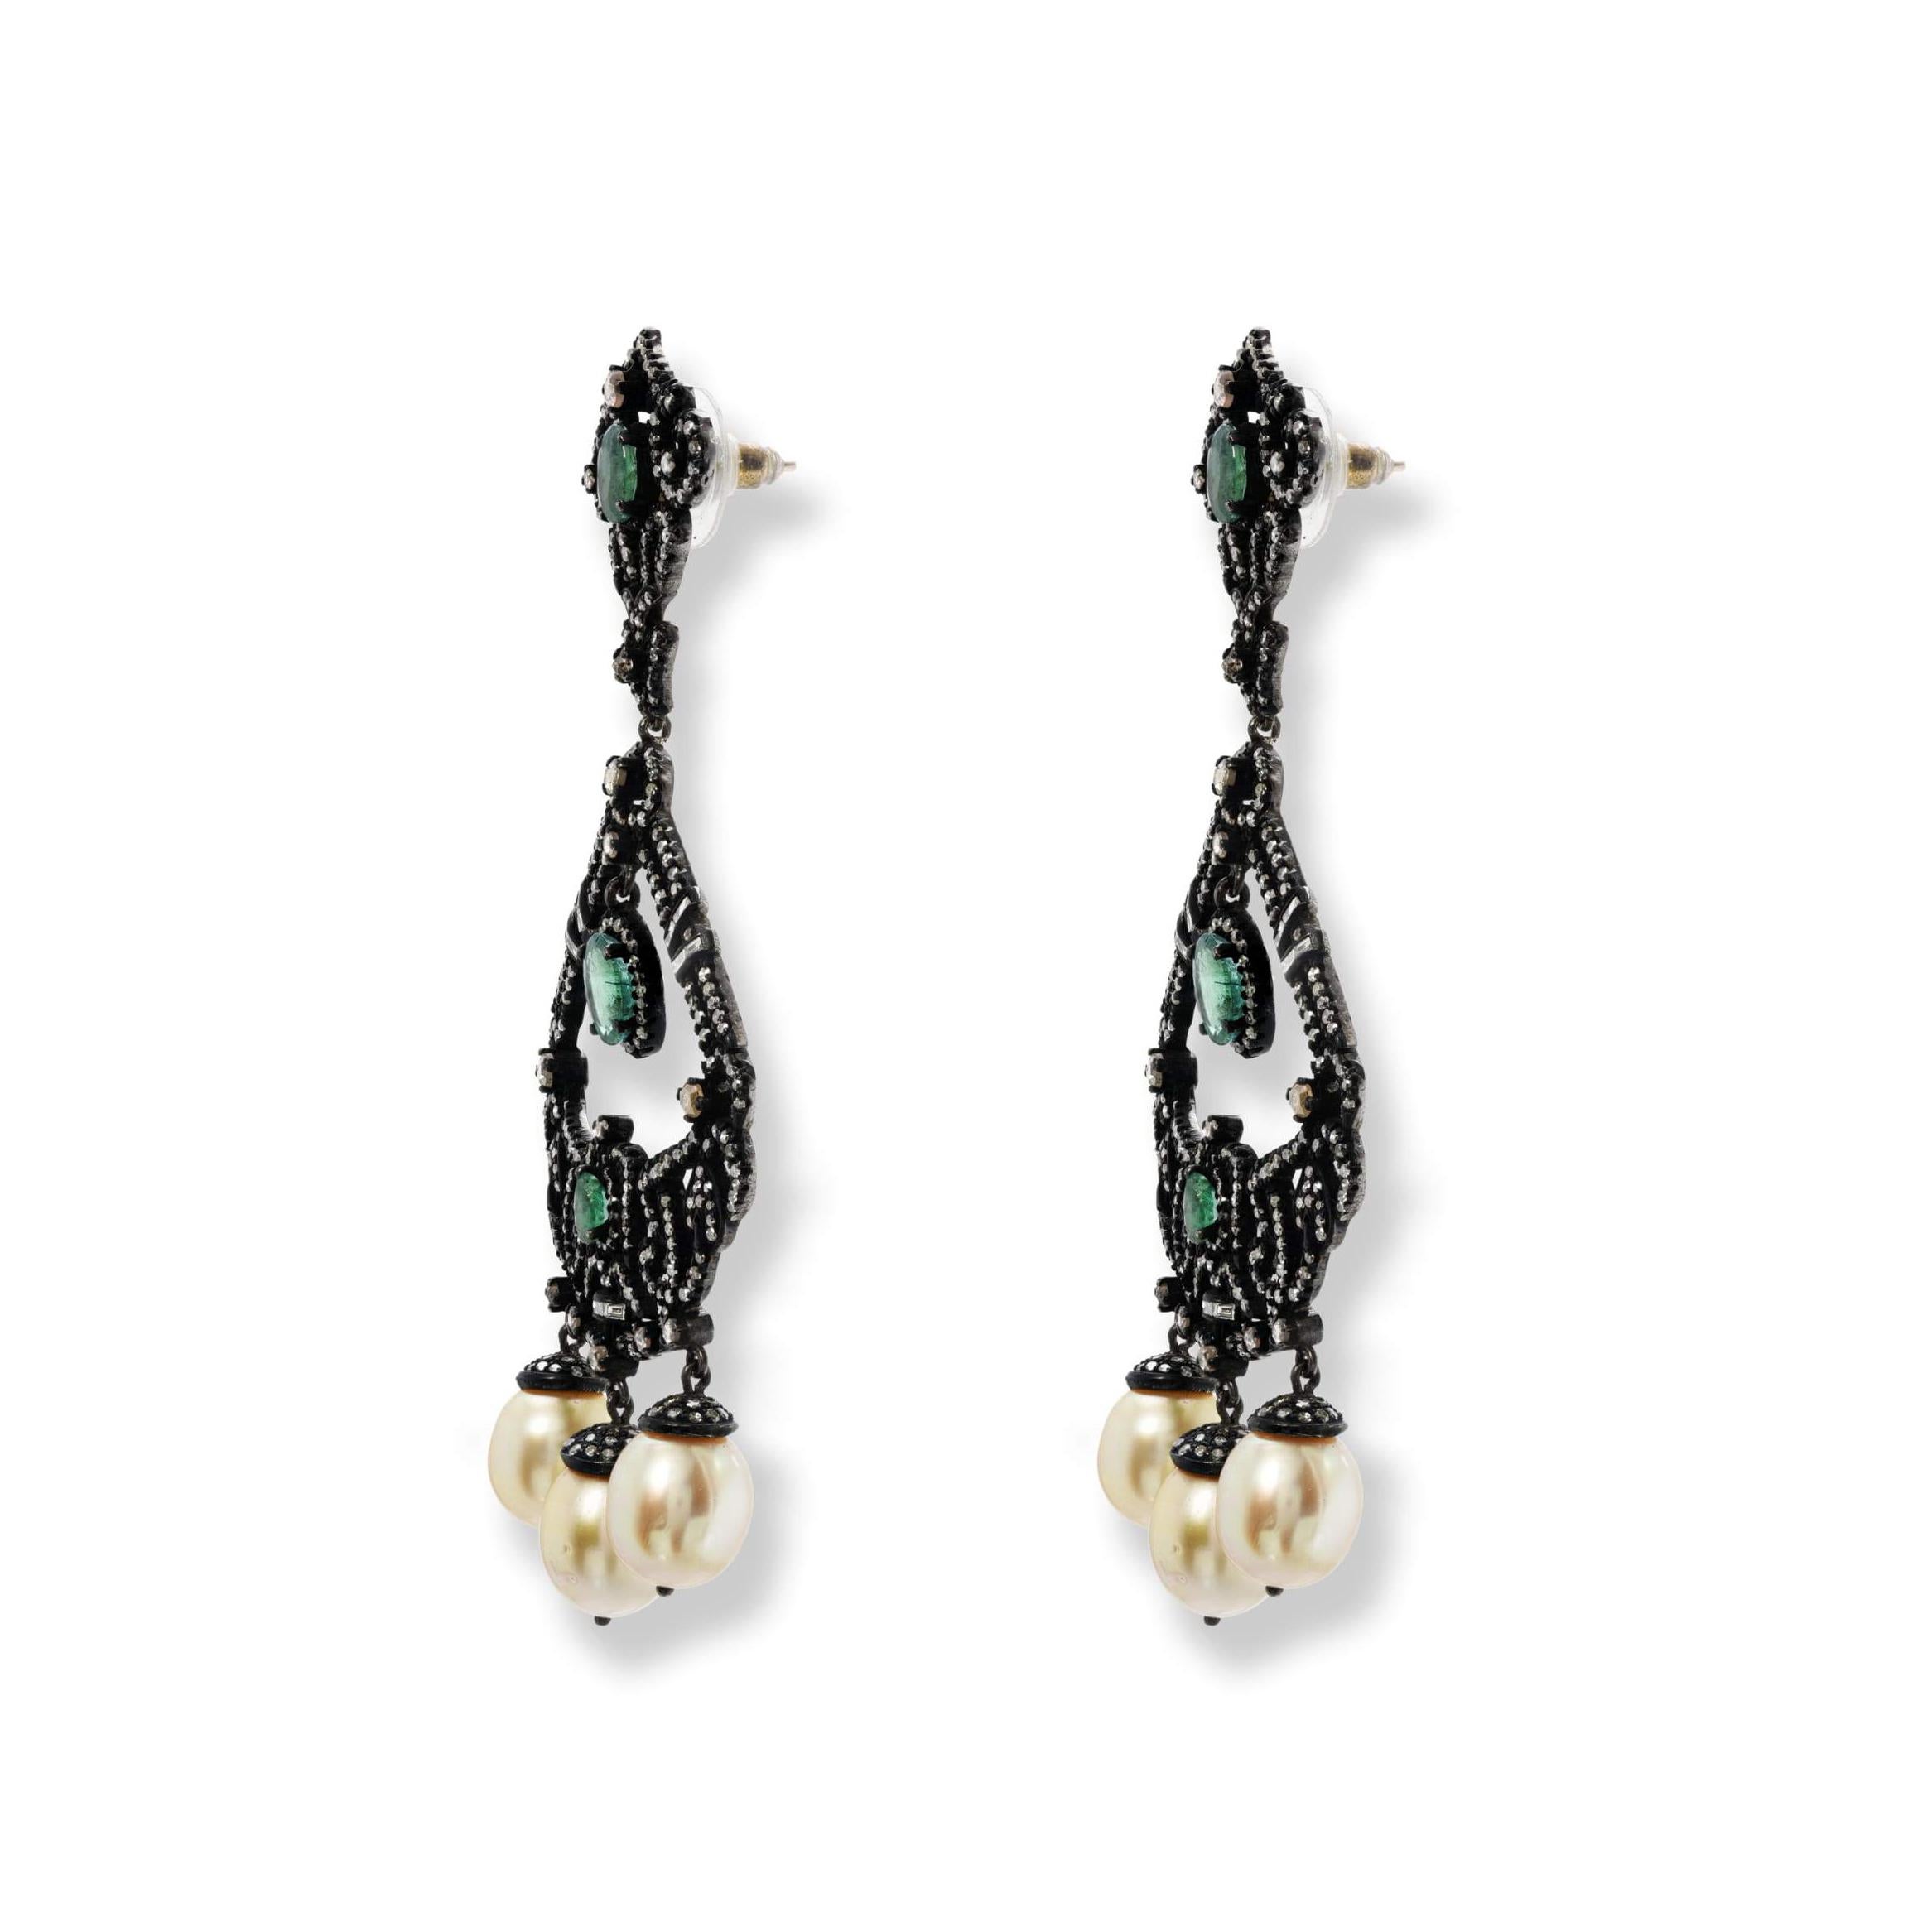 Emerald & Diamond Earrings with Pearl Drops Oxidized Silver & 14K gold. These earrings are crafted with meticulous attention to detail, blending classic and modern design for a timeless look. Their unique composition and durable construction make